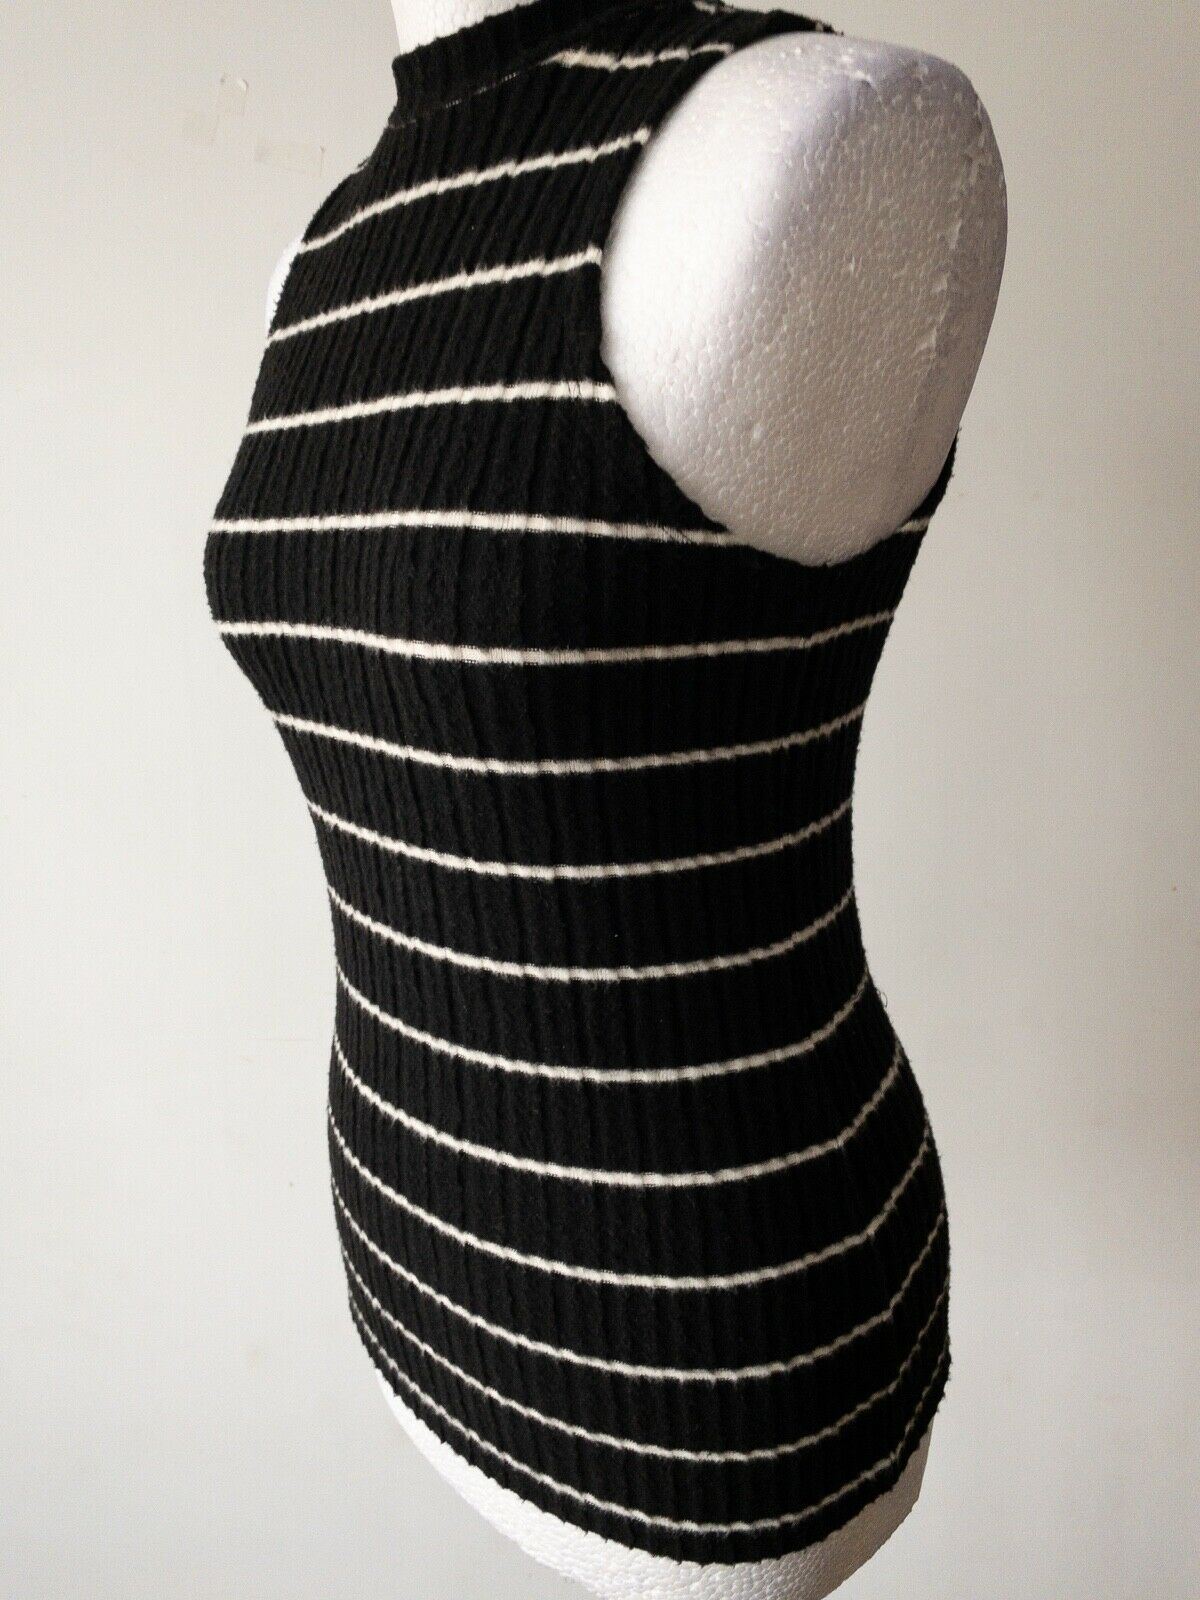 River Island Soft Knit Sleeveless Jumper Size 8 Black and White Striped